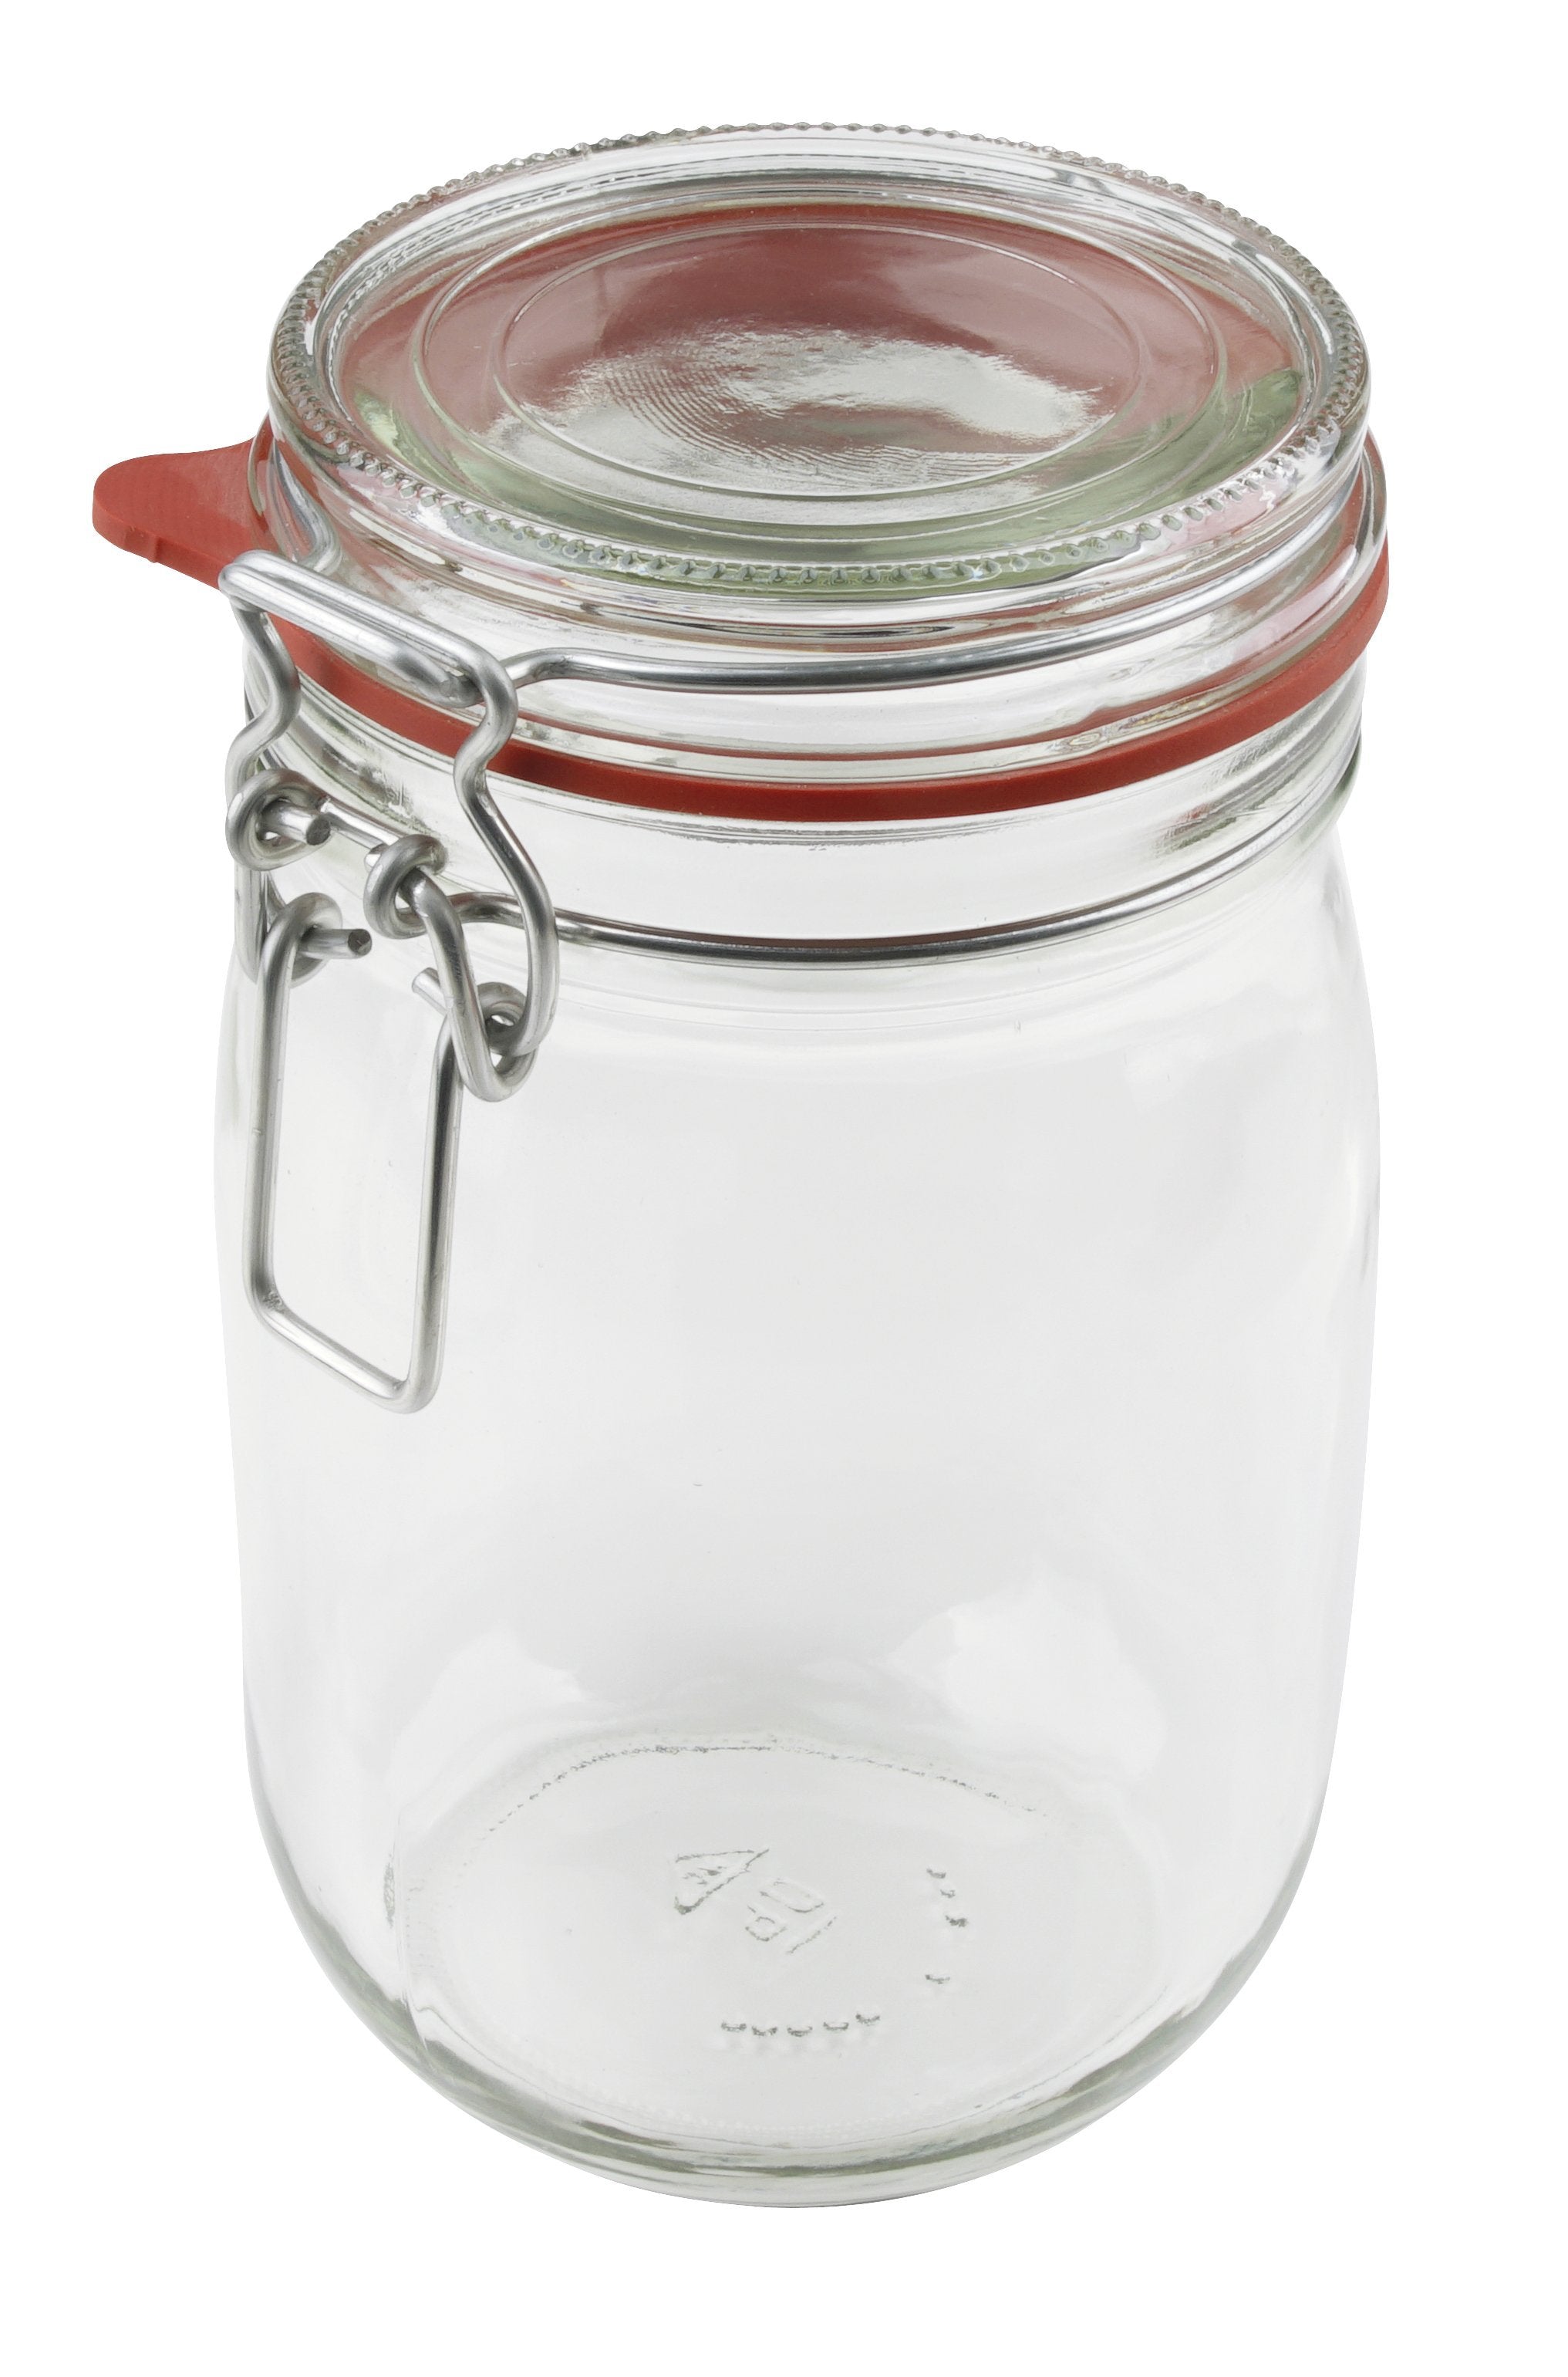 Dr. Oetker Swing Top Jar 1140 Ml - Whole and All